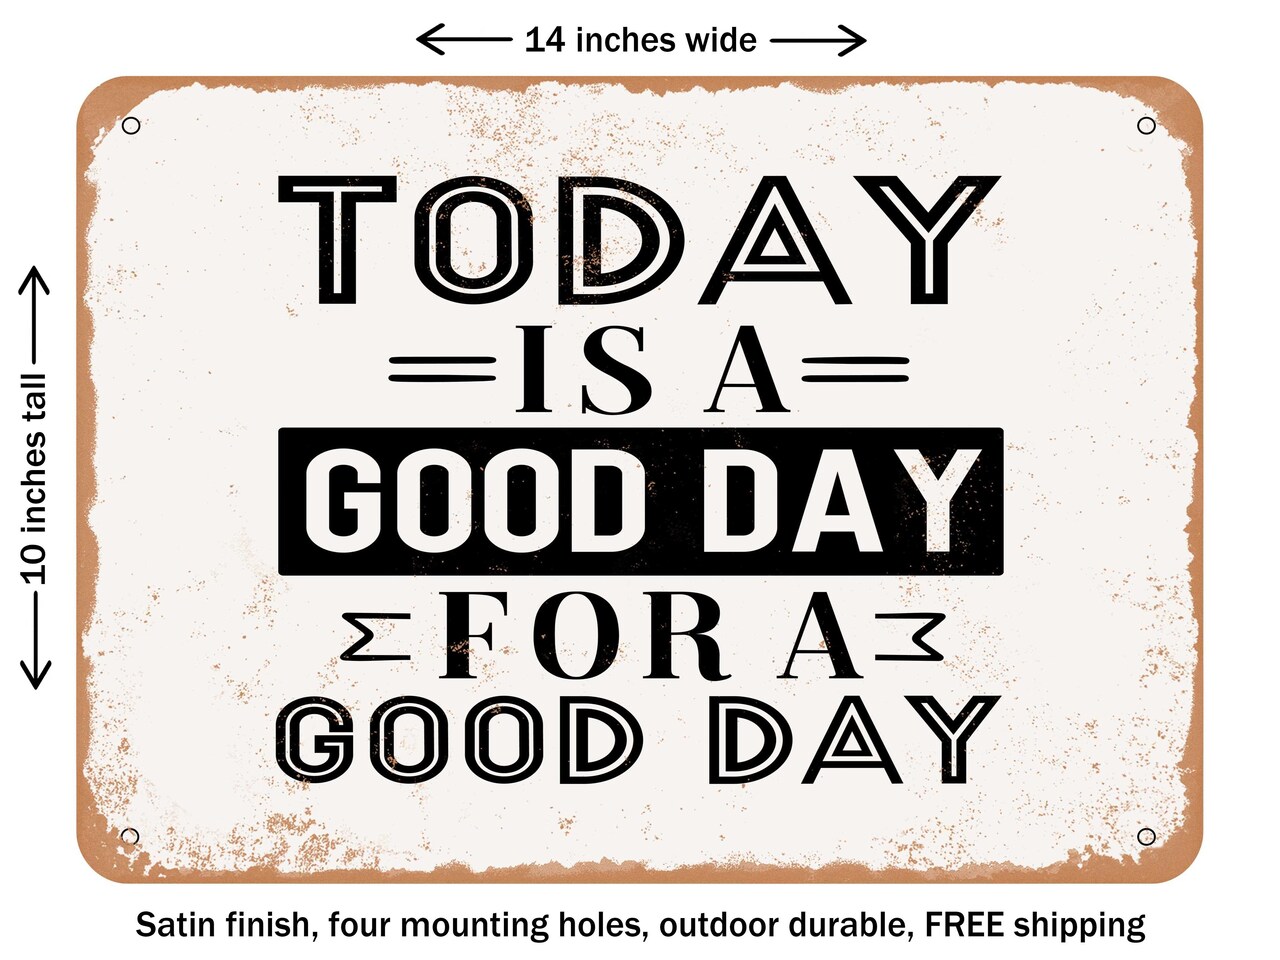 DECORATIVE METAL SIGN - today is a Good Day For a Good Day - Vintage Rusty Look